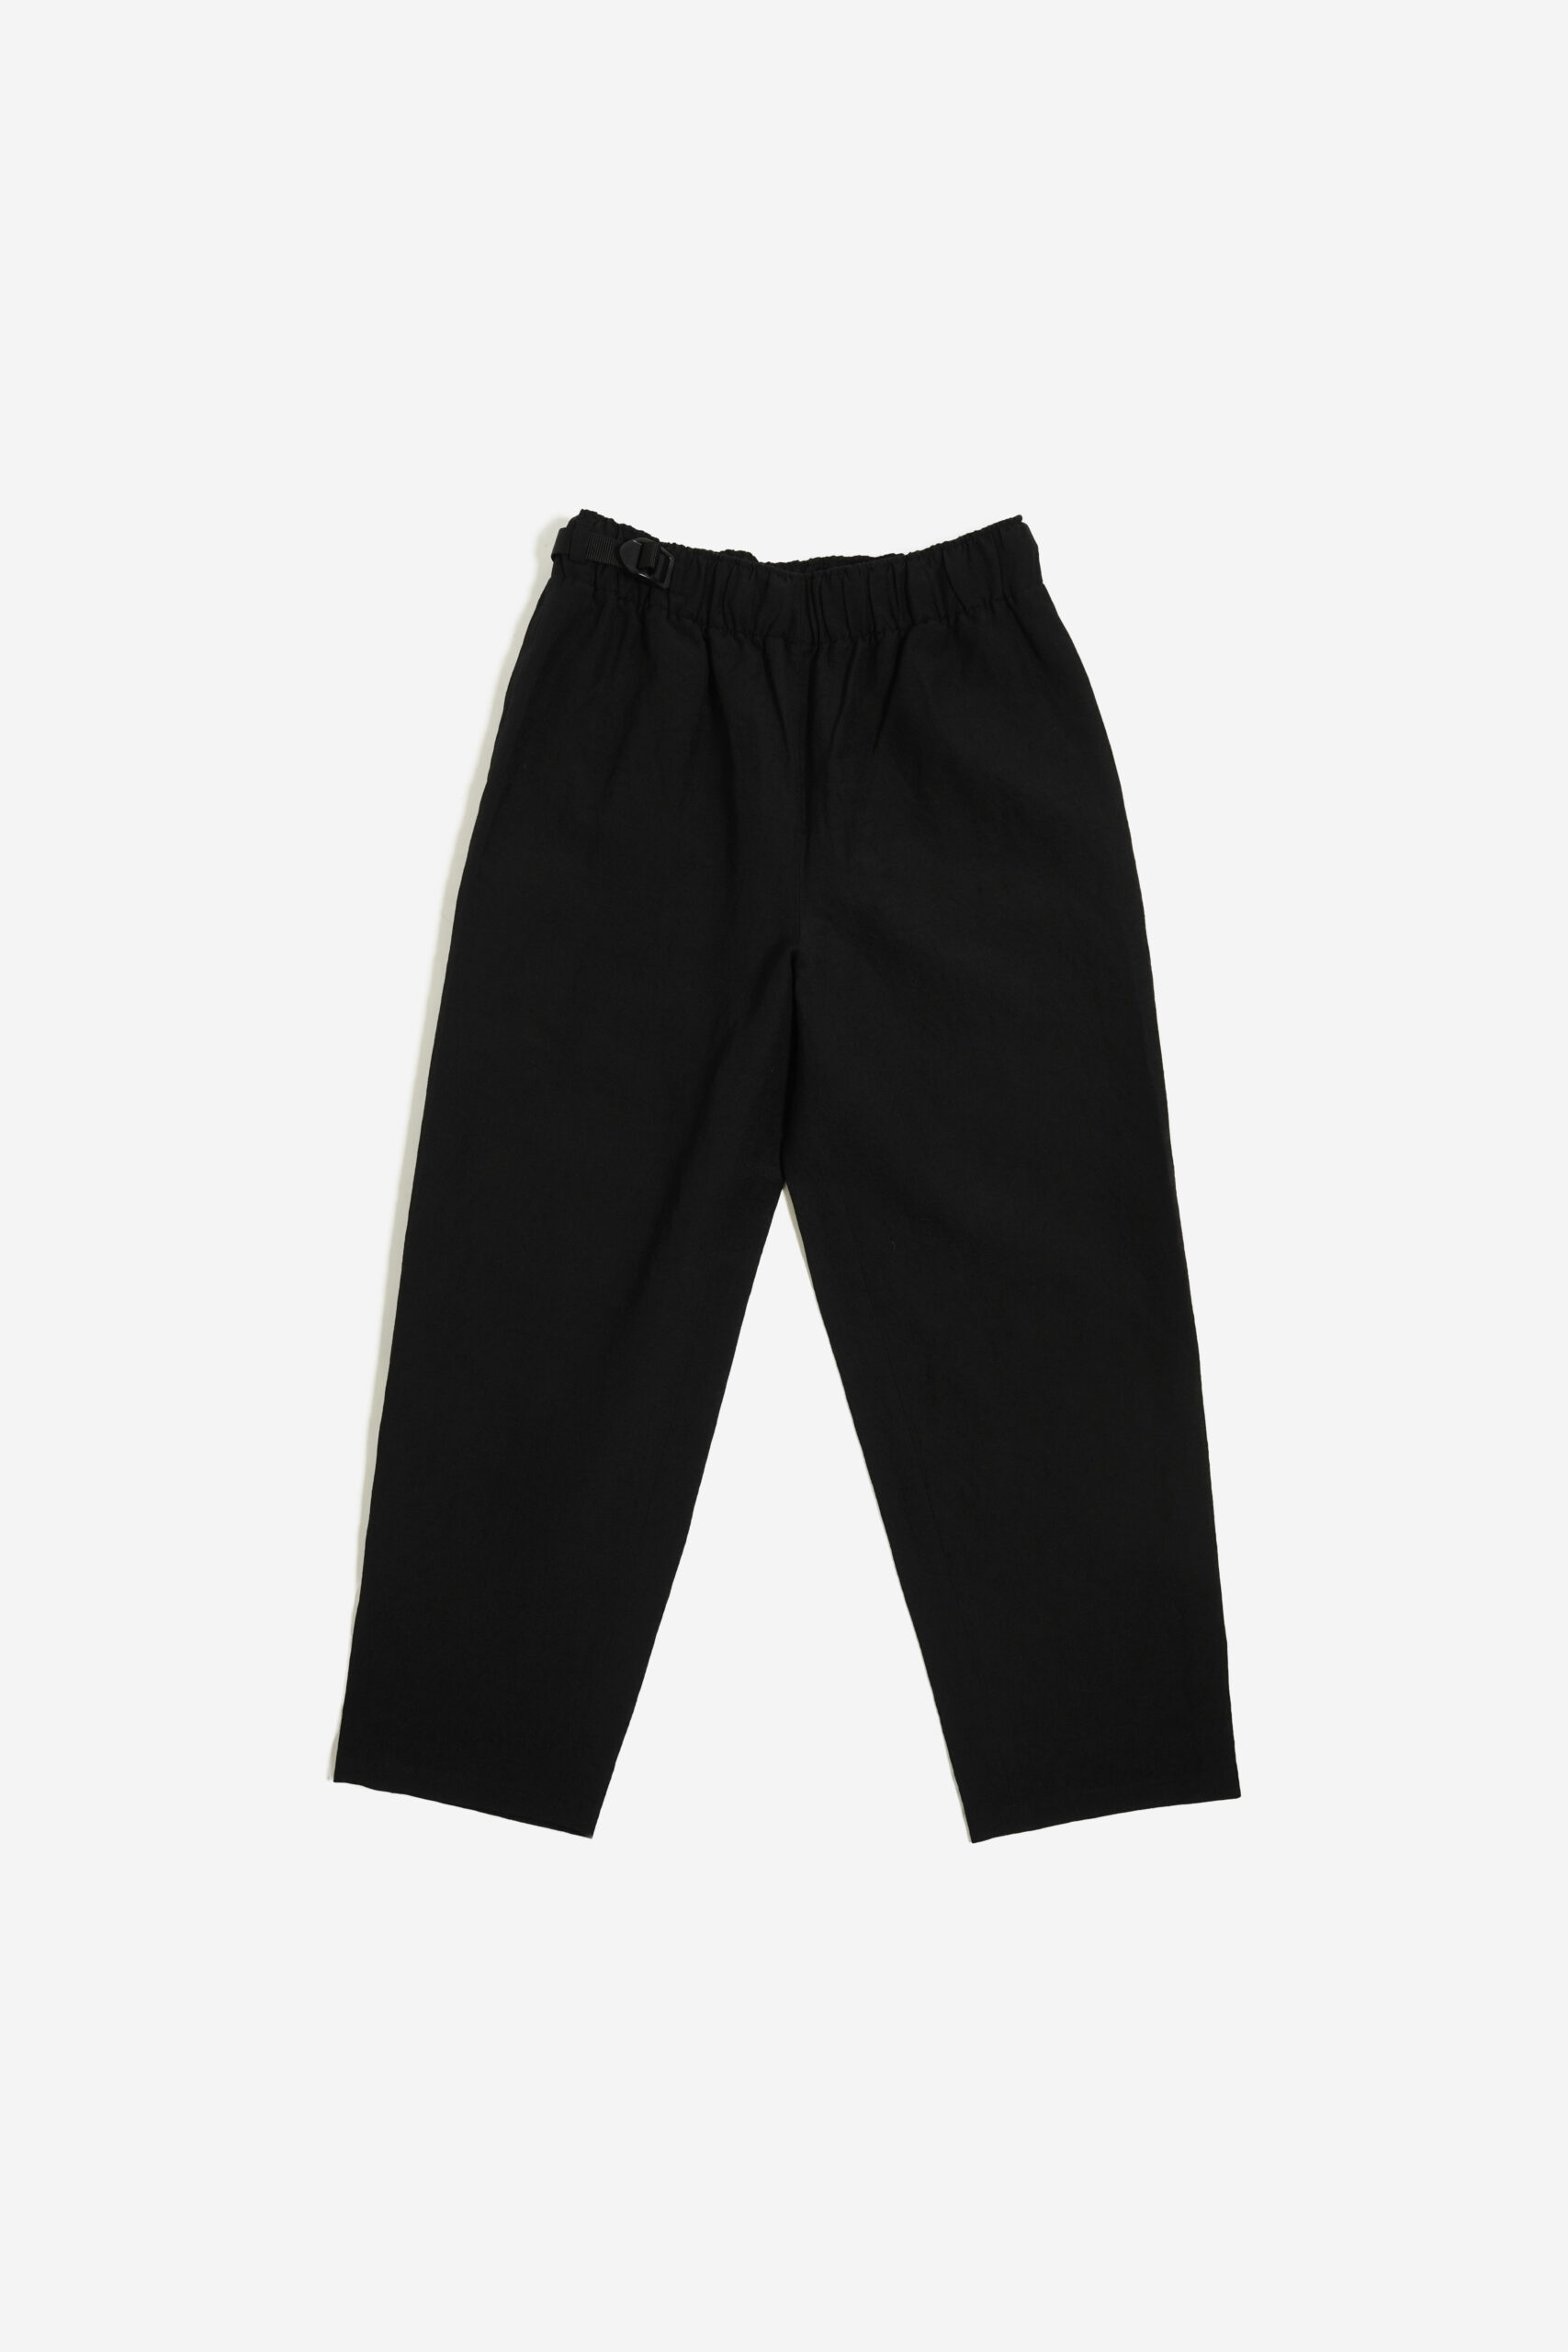 BELTED TROUSERS TYPE 2 - WOOL / LINEN